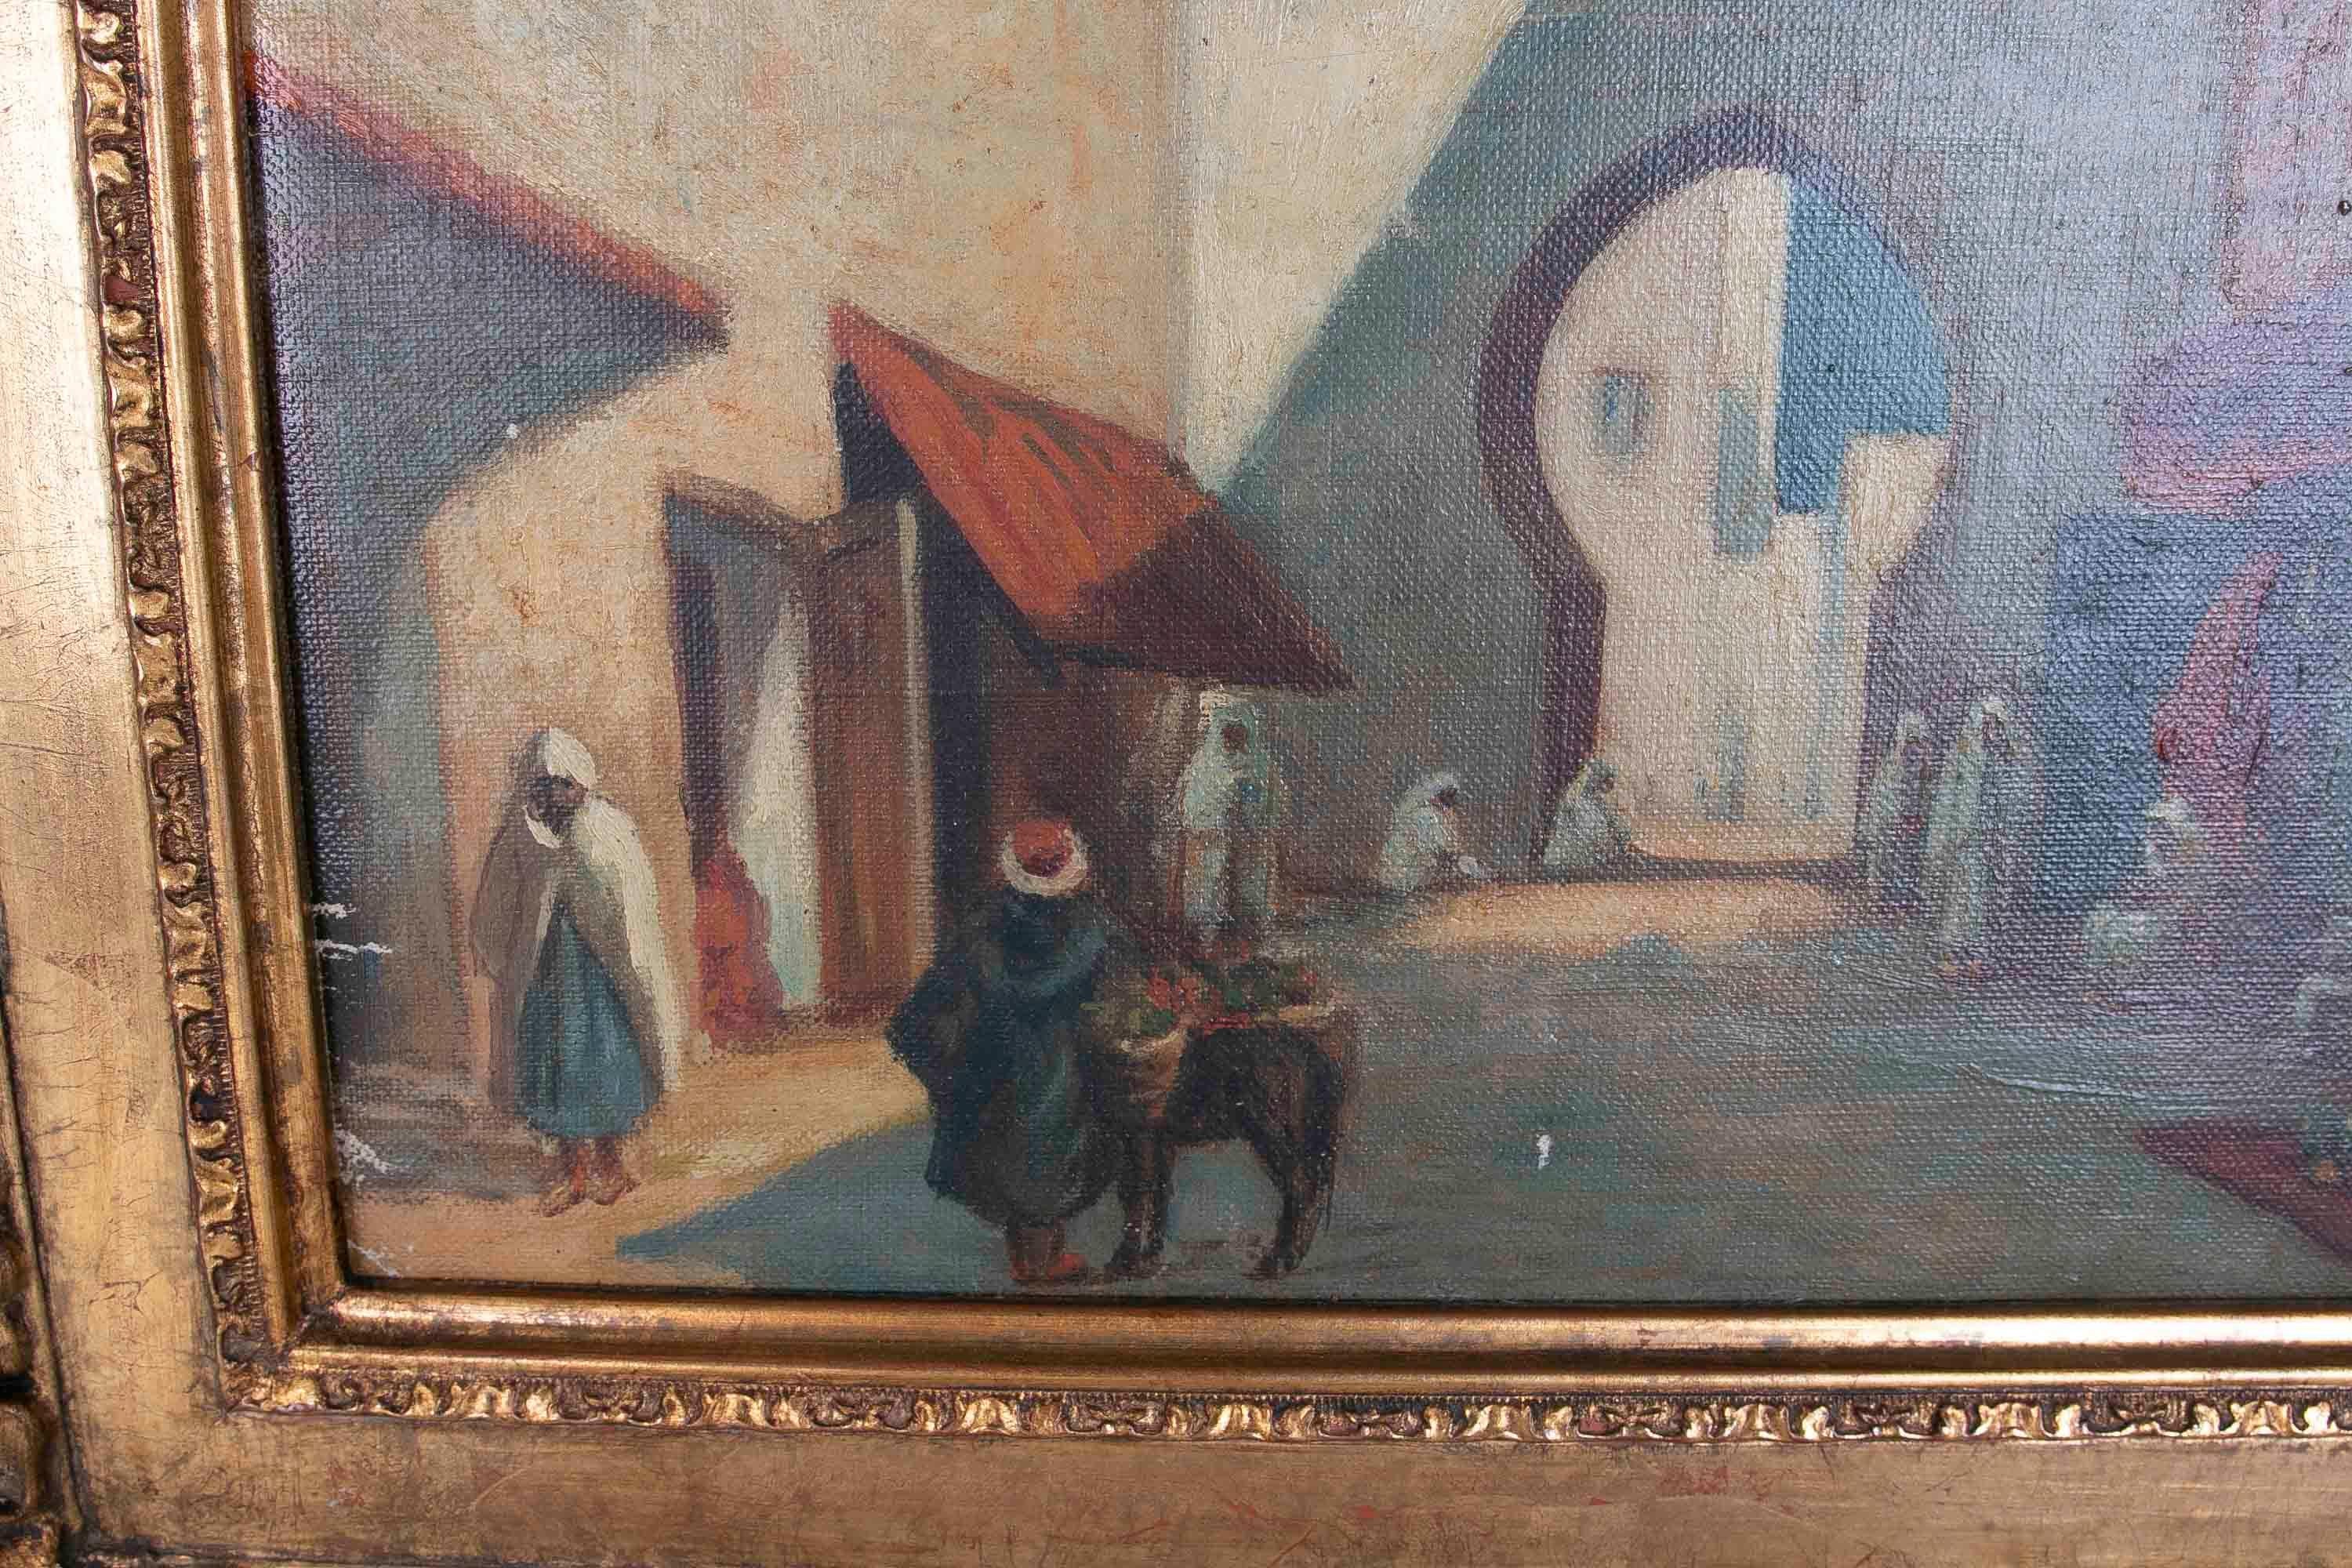 Orientalist Framed Painting of an Arabic City Dated 1884

Measurements with frame: 35.5x43x4cm.